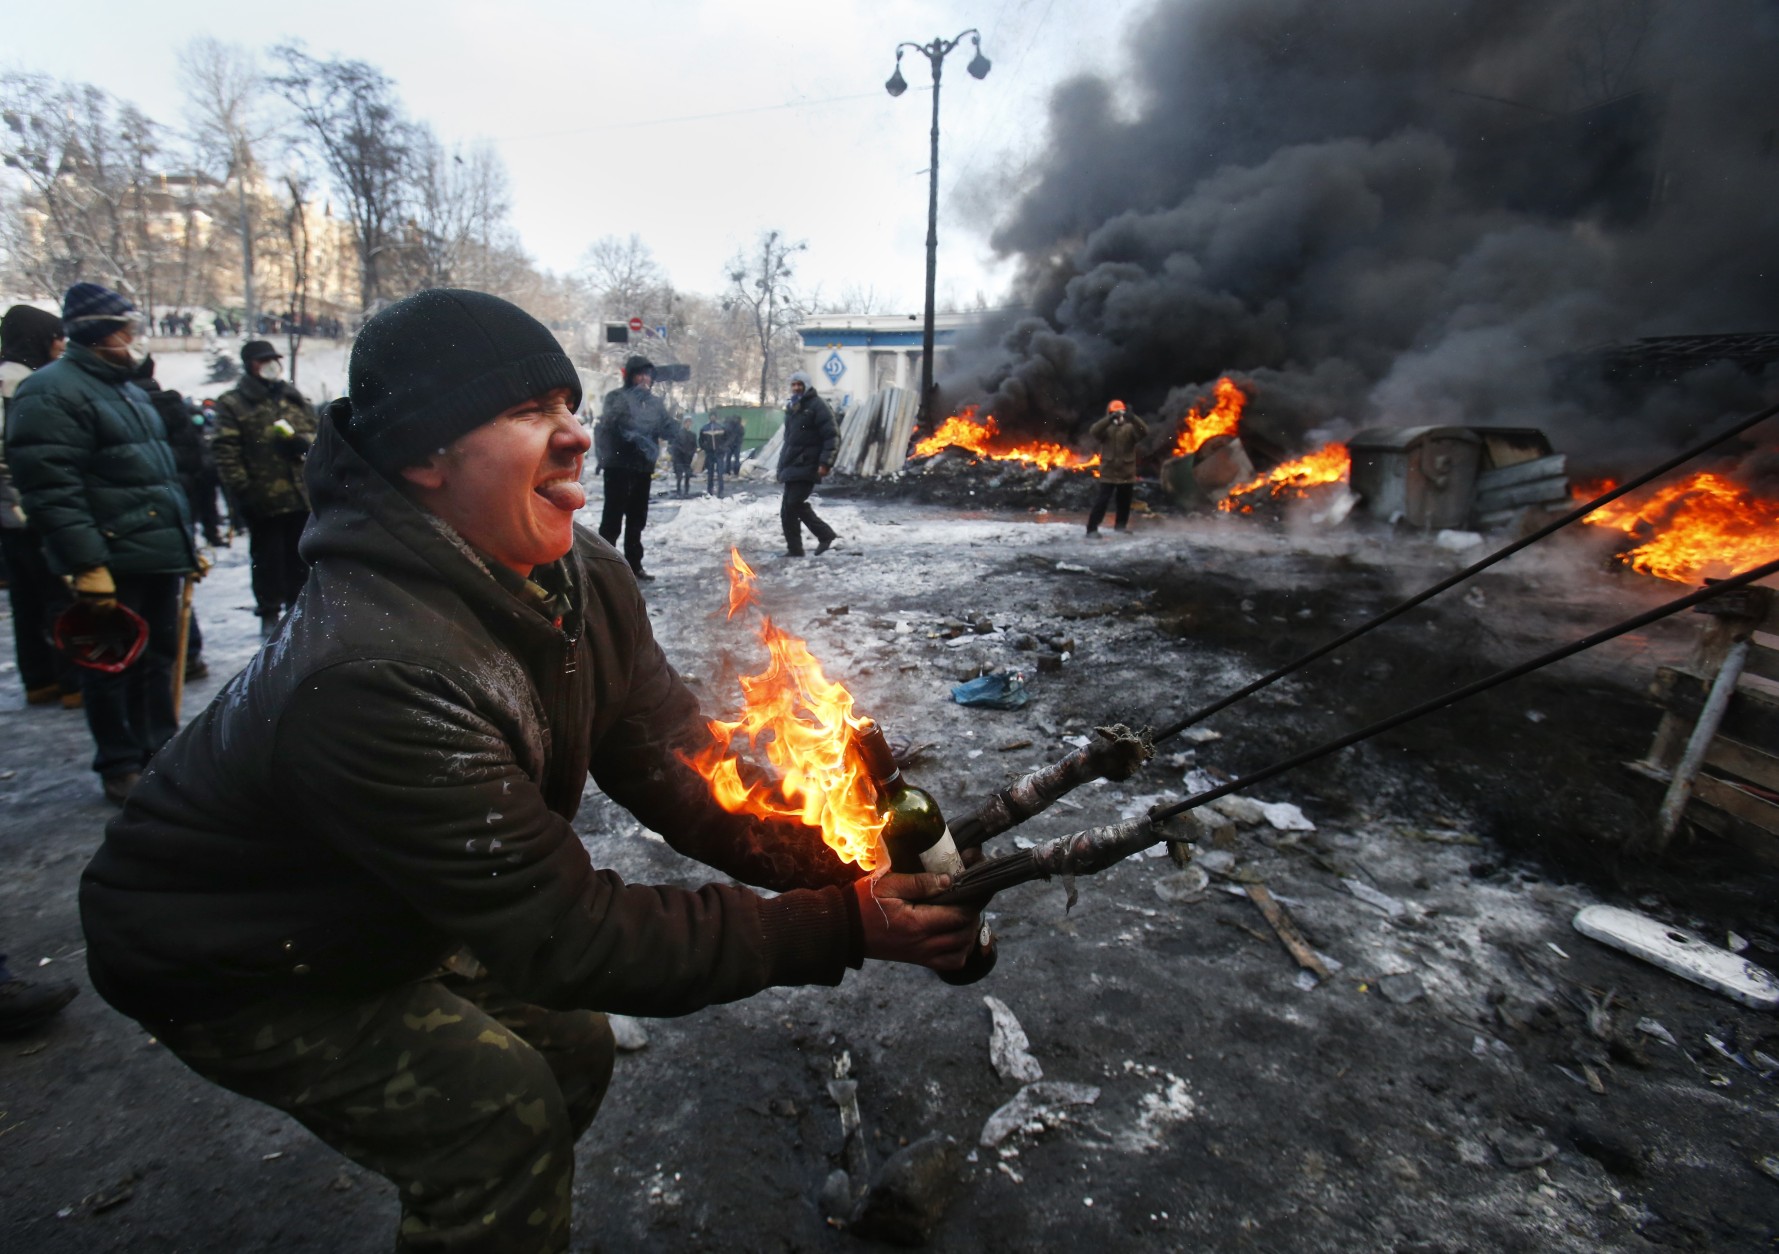 FOR USE AS DESIRED, YEAR END PHOTOS - FILE - Protesters use a large slingshot to hurl a Molotov cocktail at police in central Kiev, Ukraine, Thursday Jan. 23, 2014. (AP Photo/Sergei Grits, File)